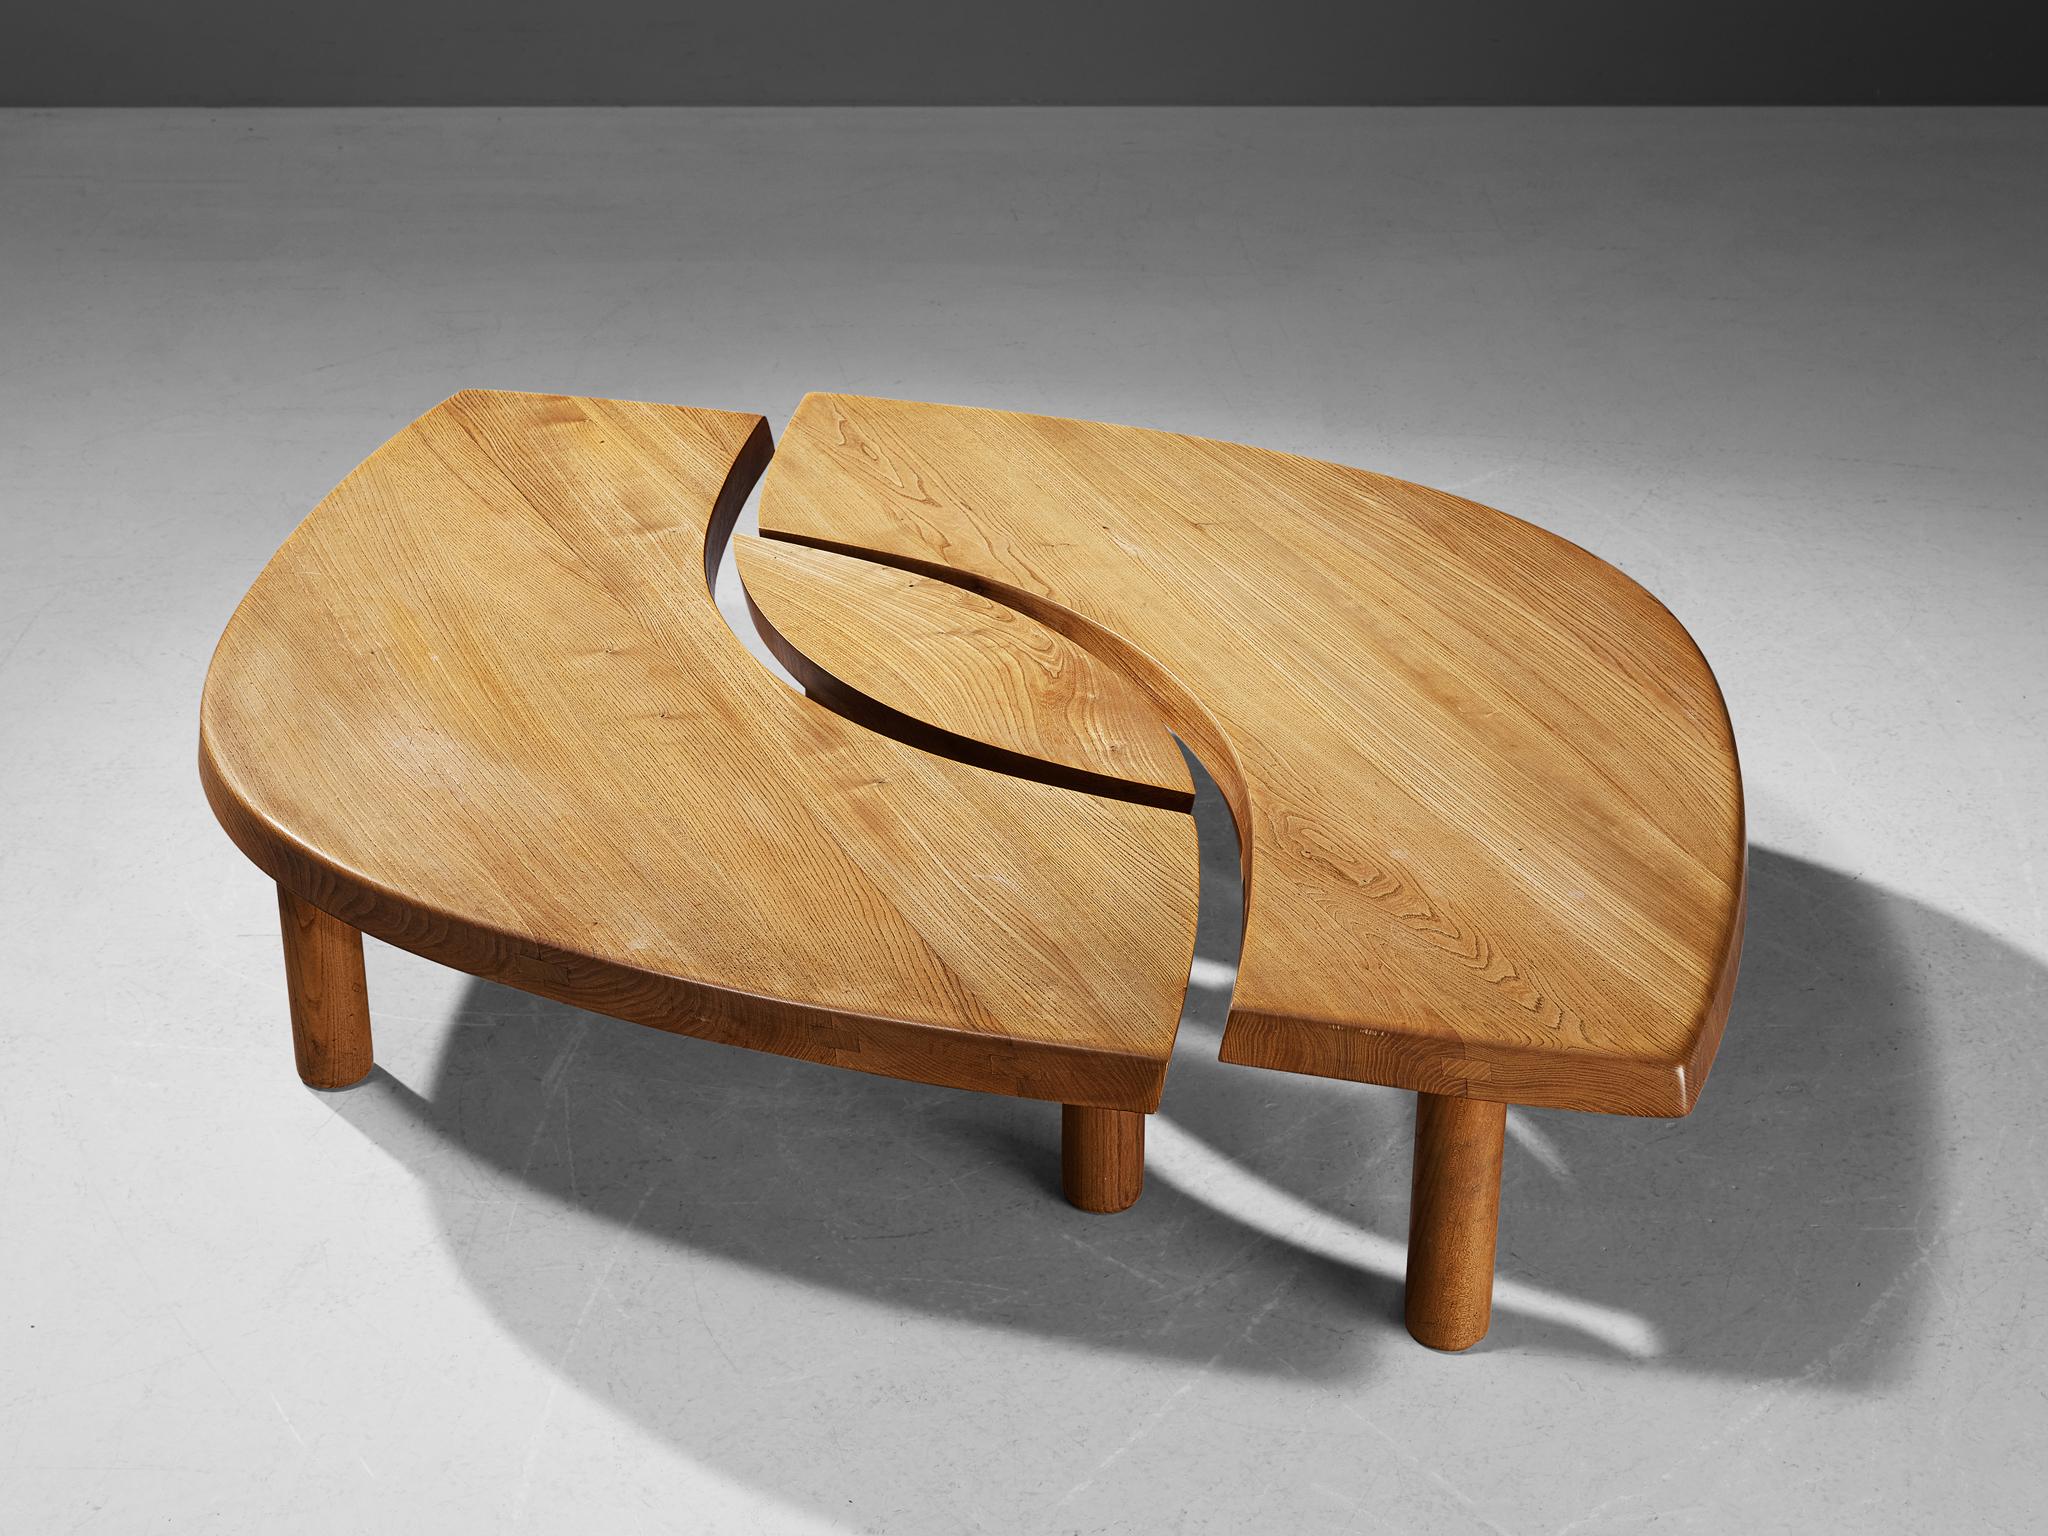 Pierre Chapo, coffee table, model T22C, elm, France, circa 1972.

This design is an early edition, created according to the original craft methodology of Pierre Chapo. This beautiful eye-shaped cocktail table is designed by the French designer and